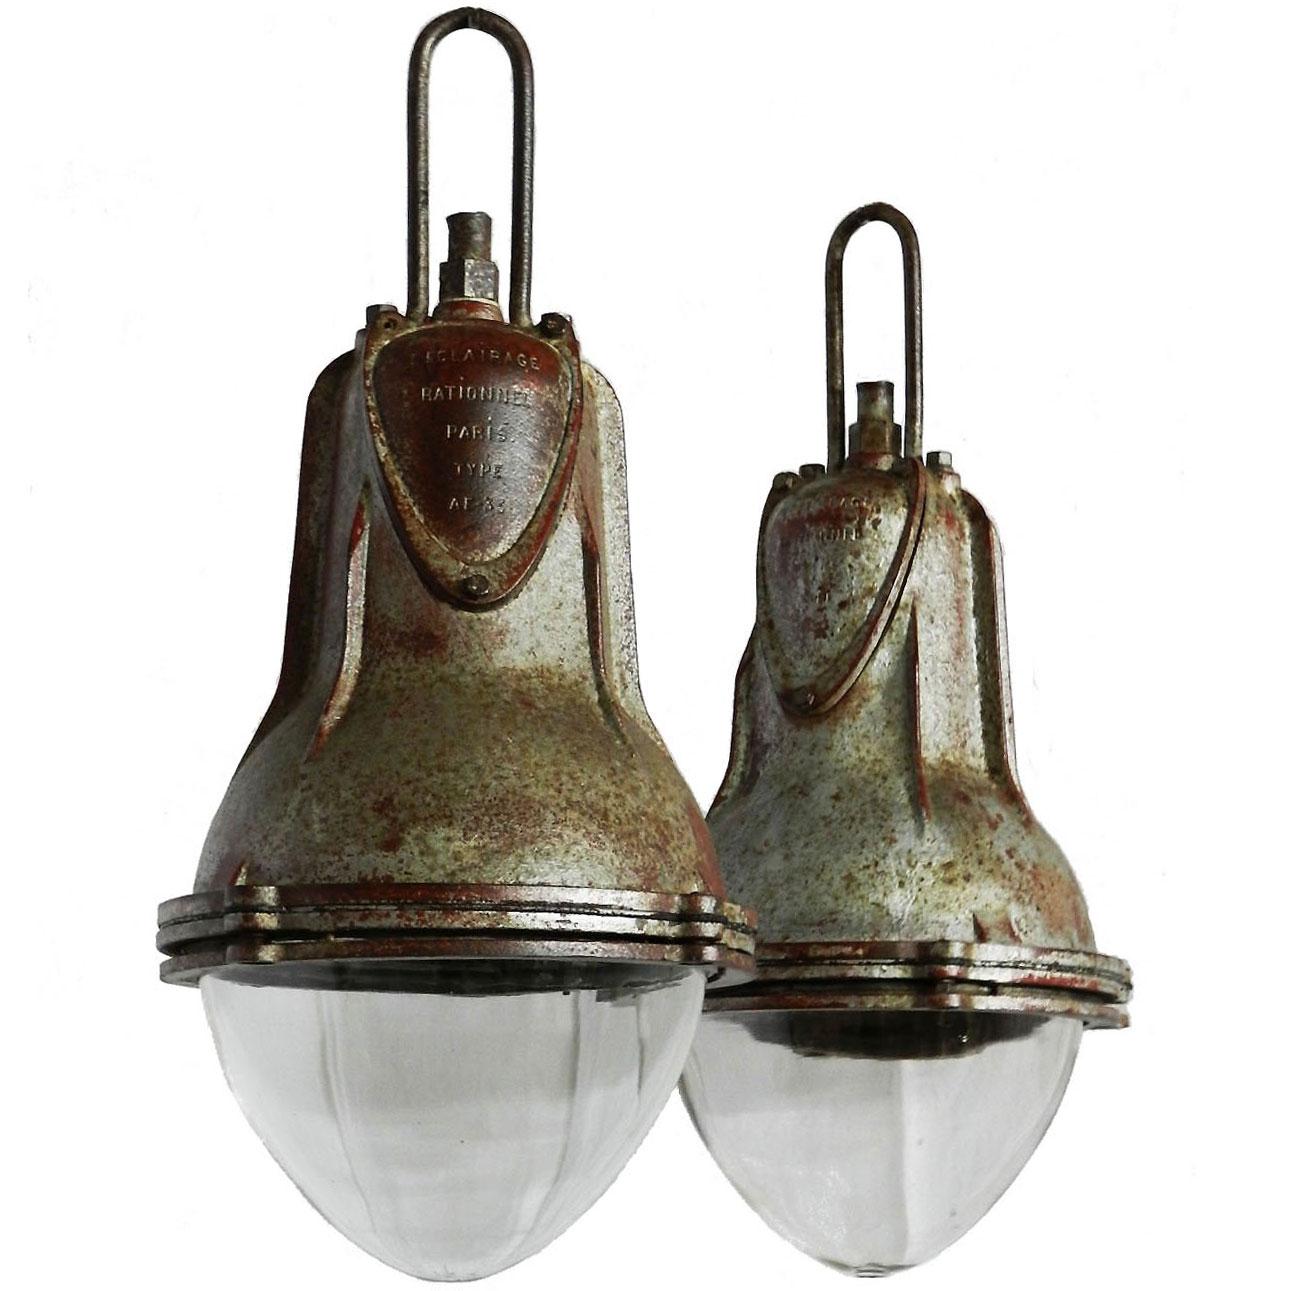 Pair of Industrial Pendant Lights Large French Glass Iron and Chains Midcentury